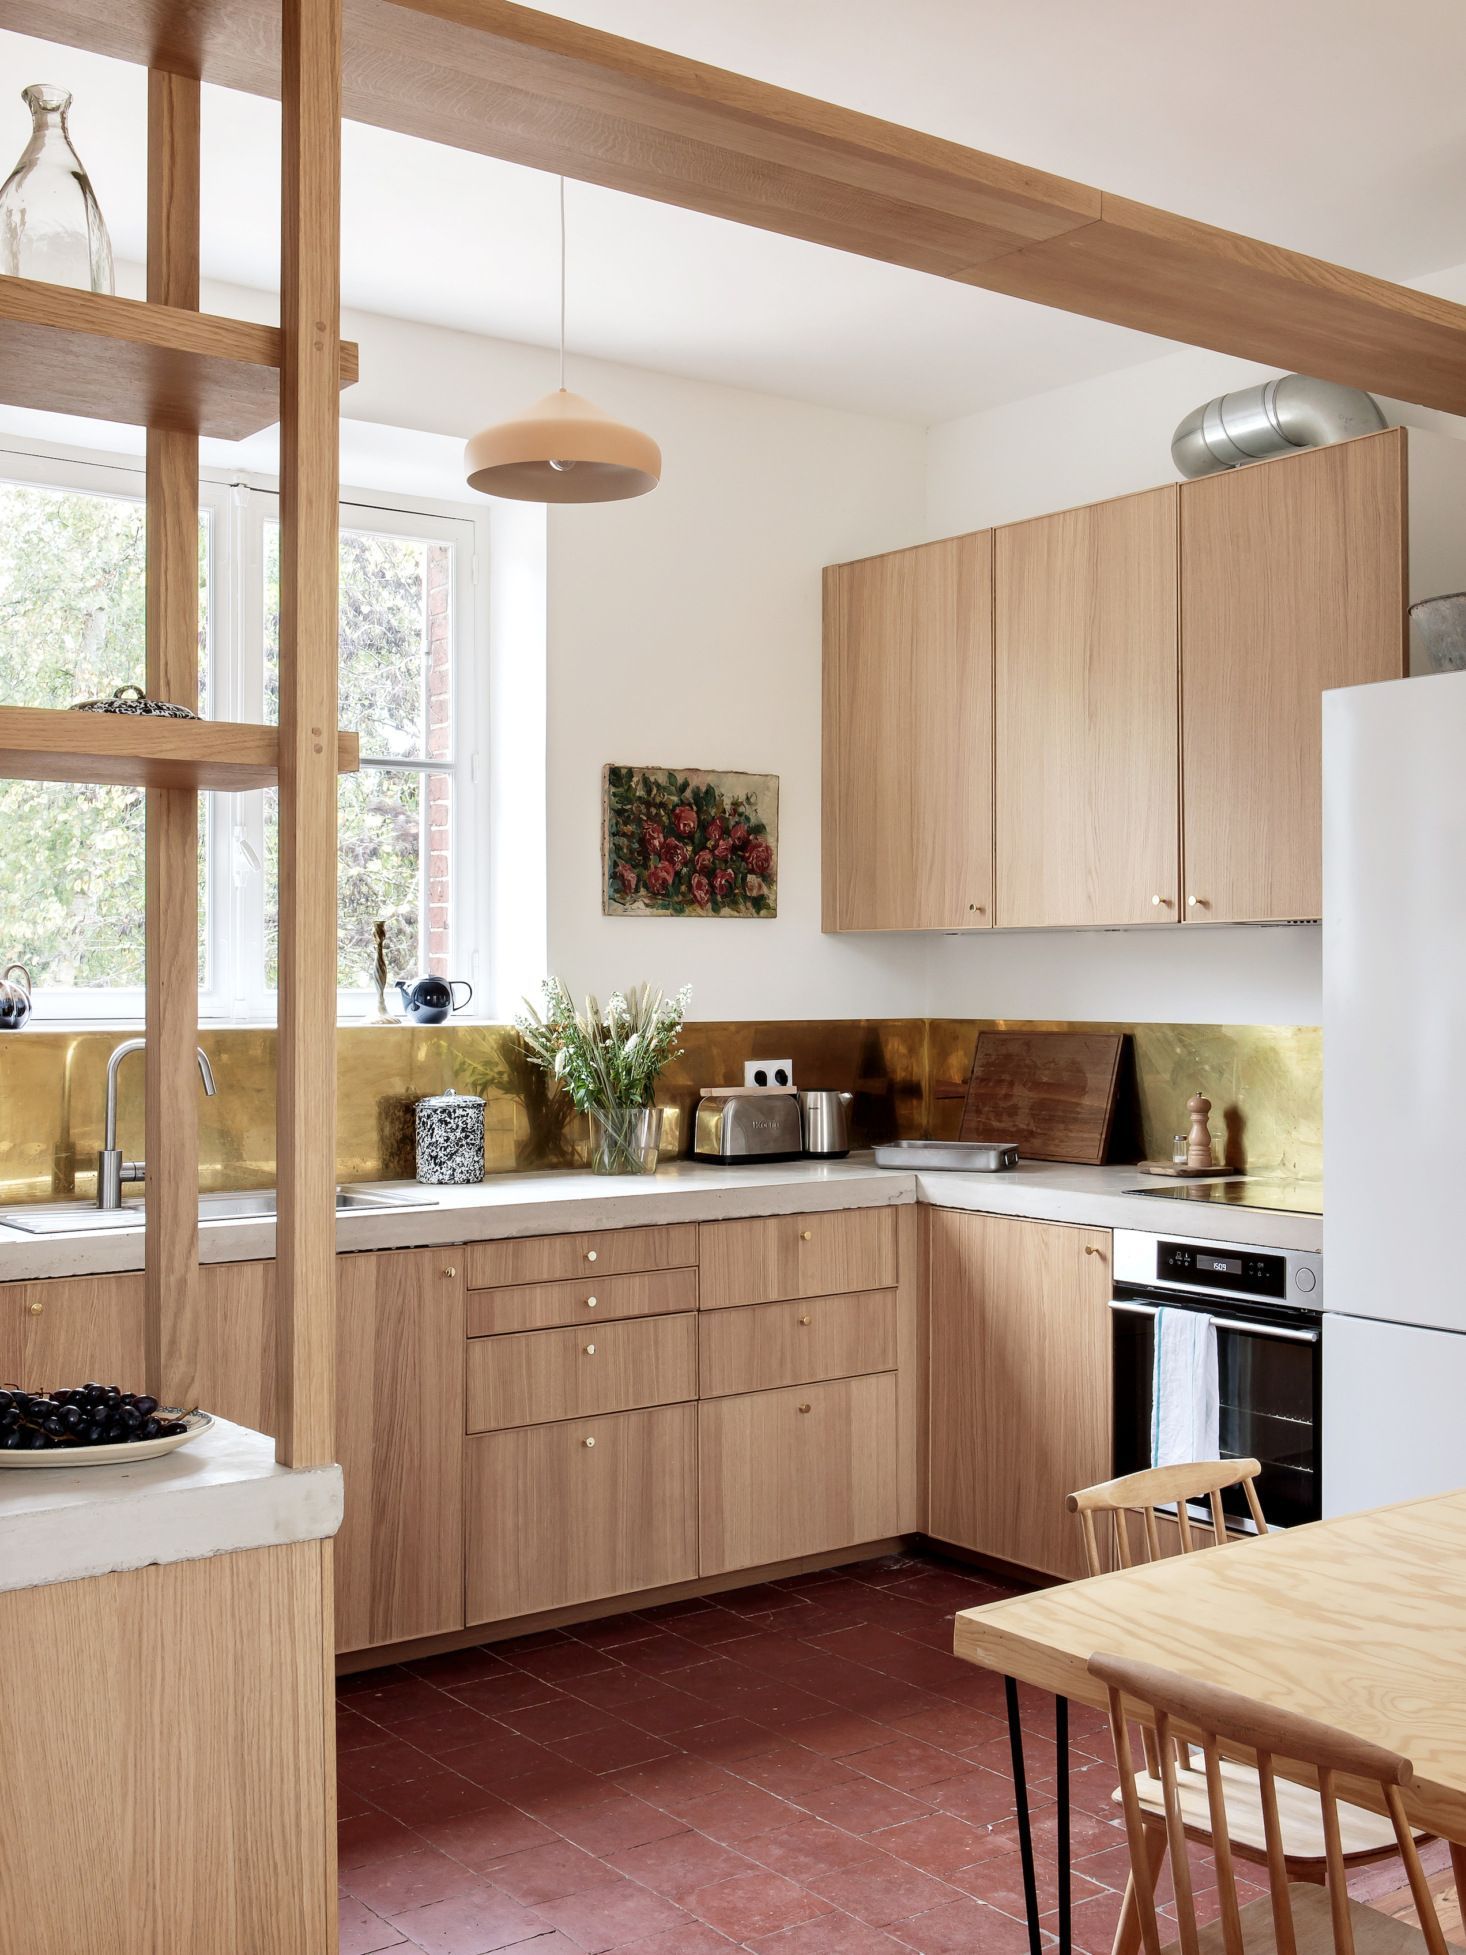 IKEA Kitchen Ideas - The Most Beautiful Kitchens Made from IKEA